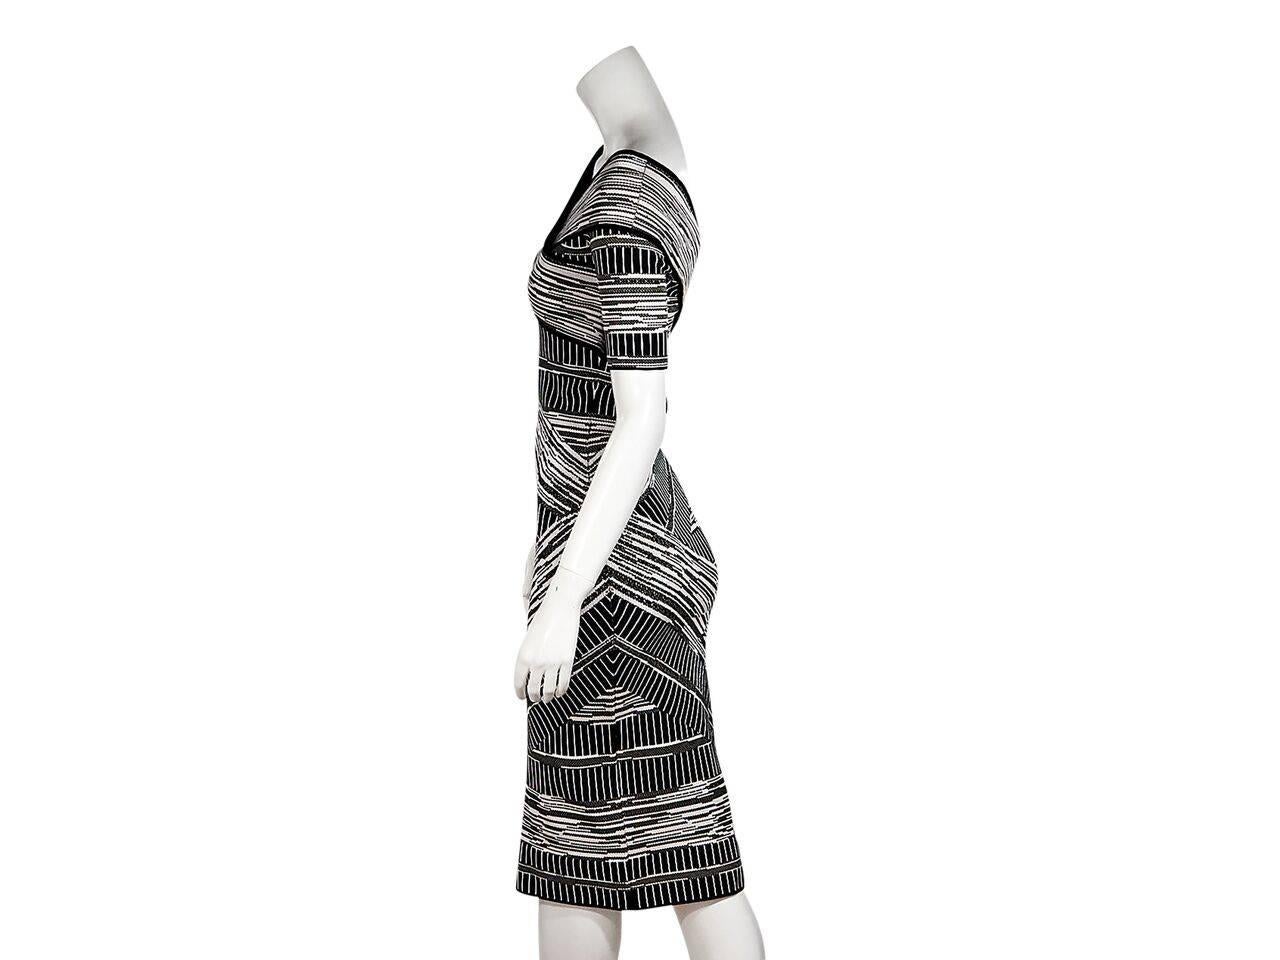 Product details:  Black and white bandage dress by Christian Siriano.  Wide boatneck.  Short sleeves.  Pullover style.  
Condition: Pre-owned. New with tags.
Est. Retail $ 1,500.00